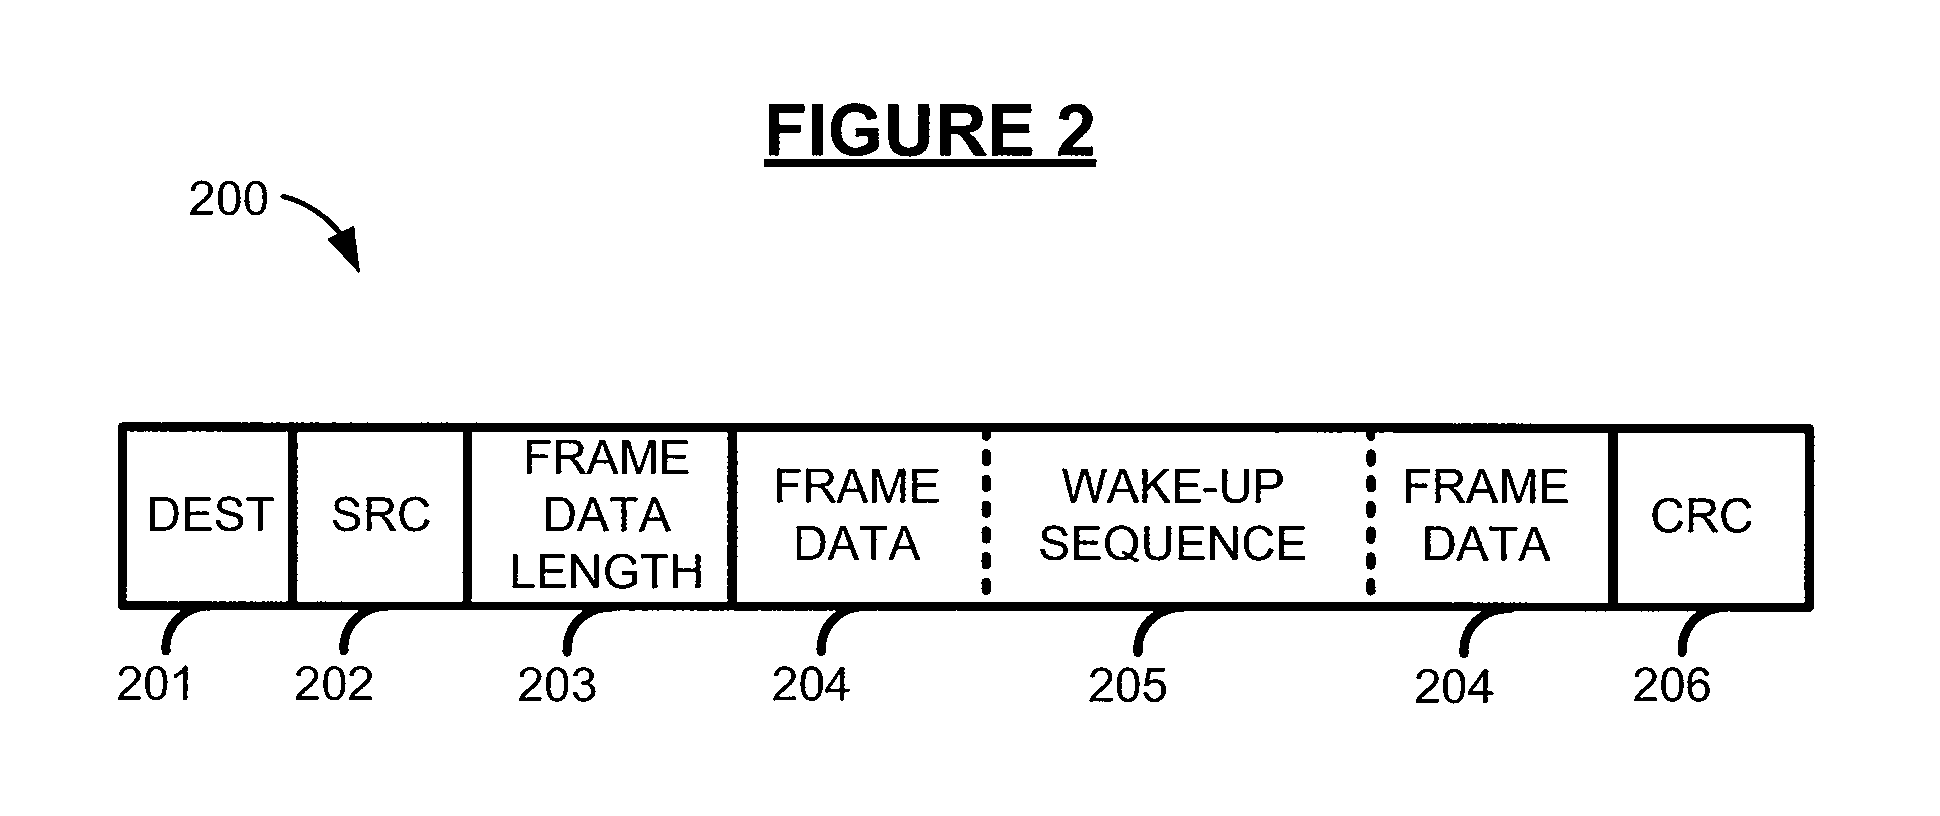 Systems and methods for waking up wireless LAN devices